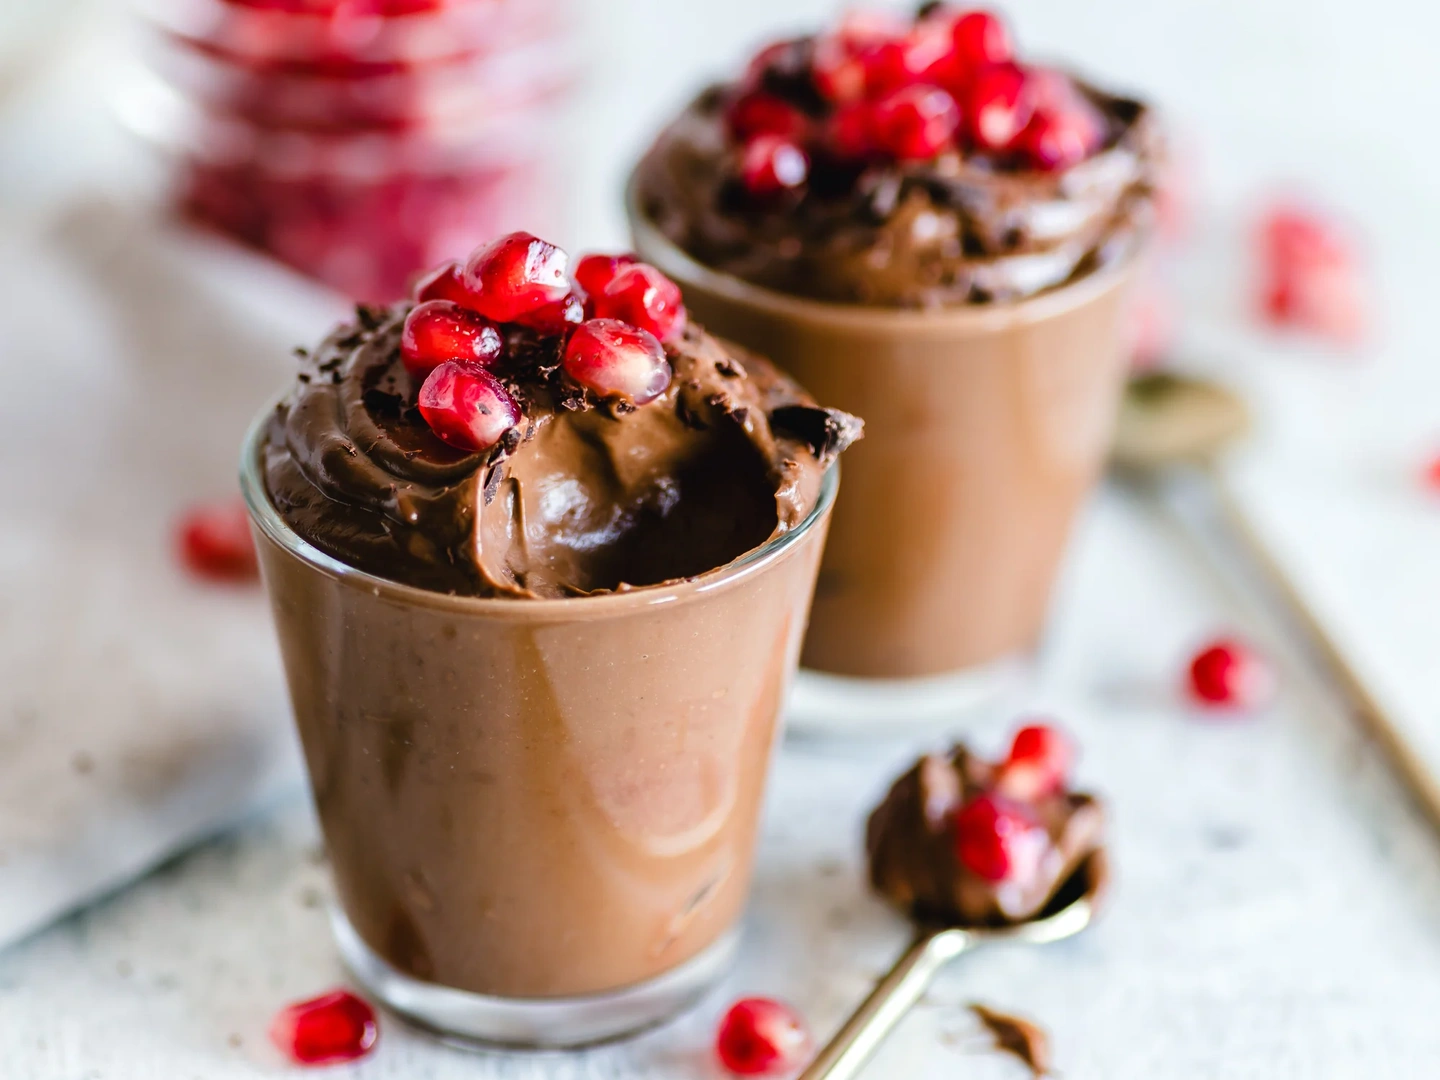 5 Fancy Chocolate Desserts To Wow Your Guests!